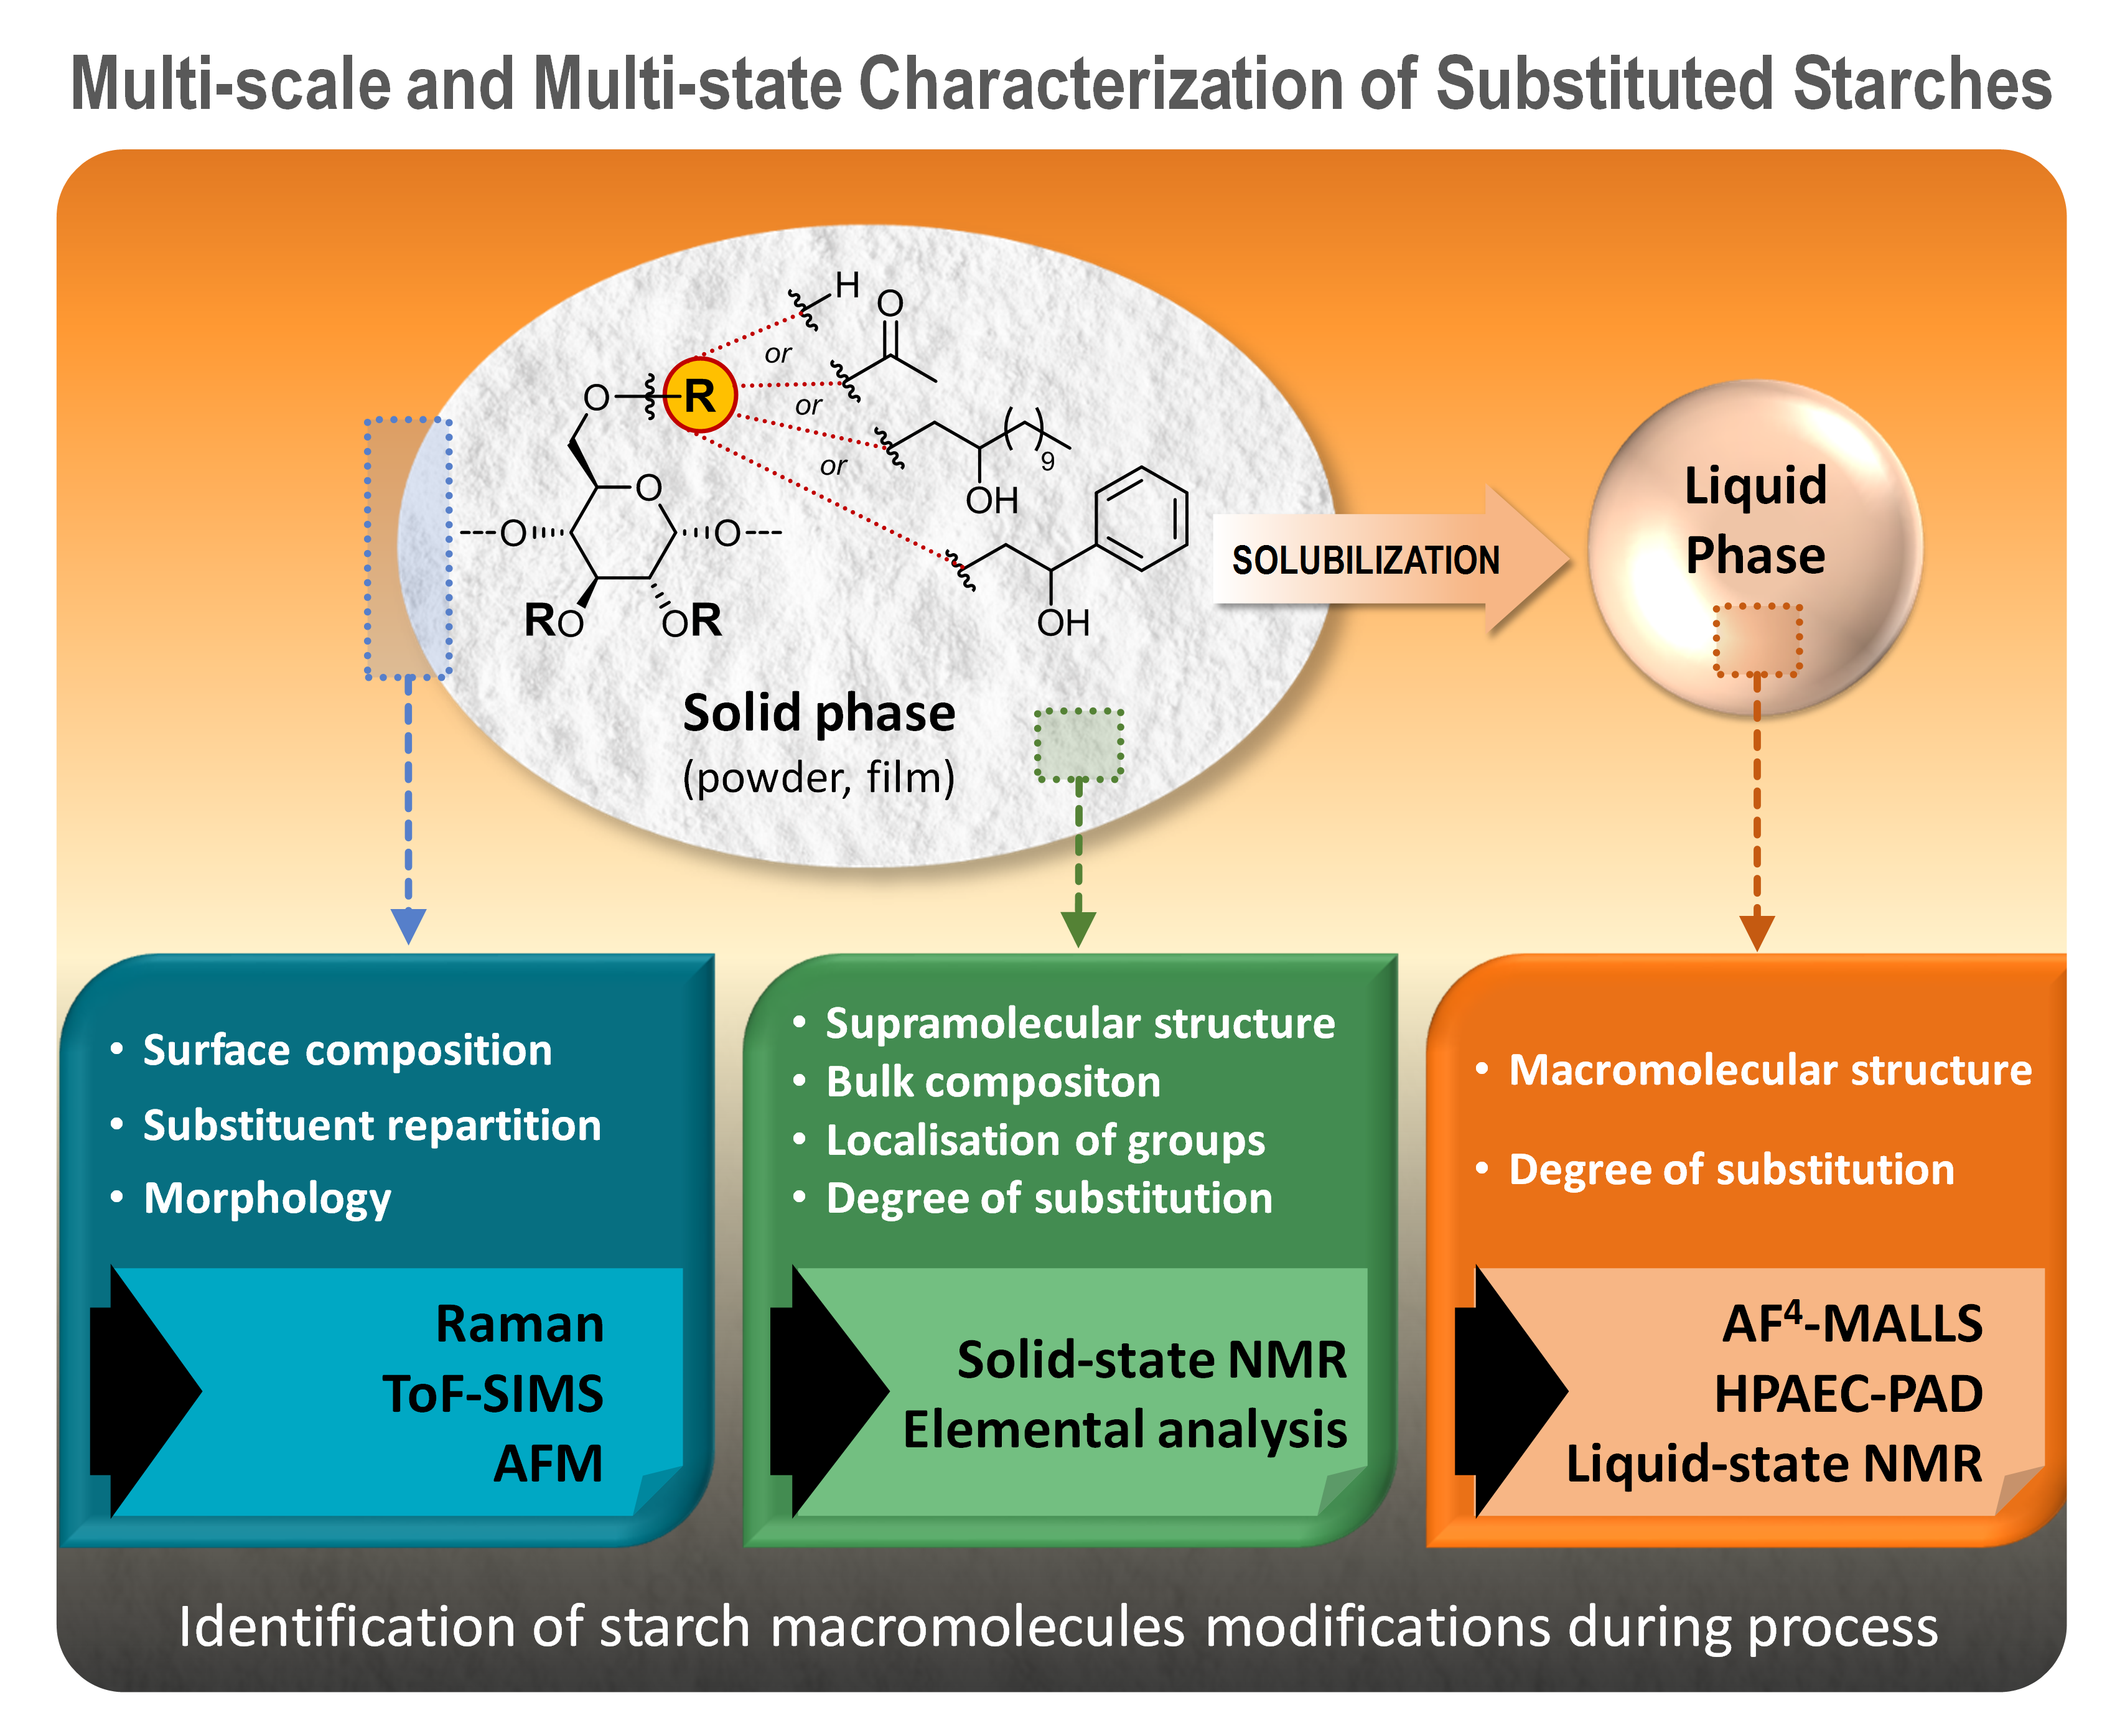 Chemical structure of starch macromolecule [37]